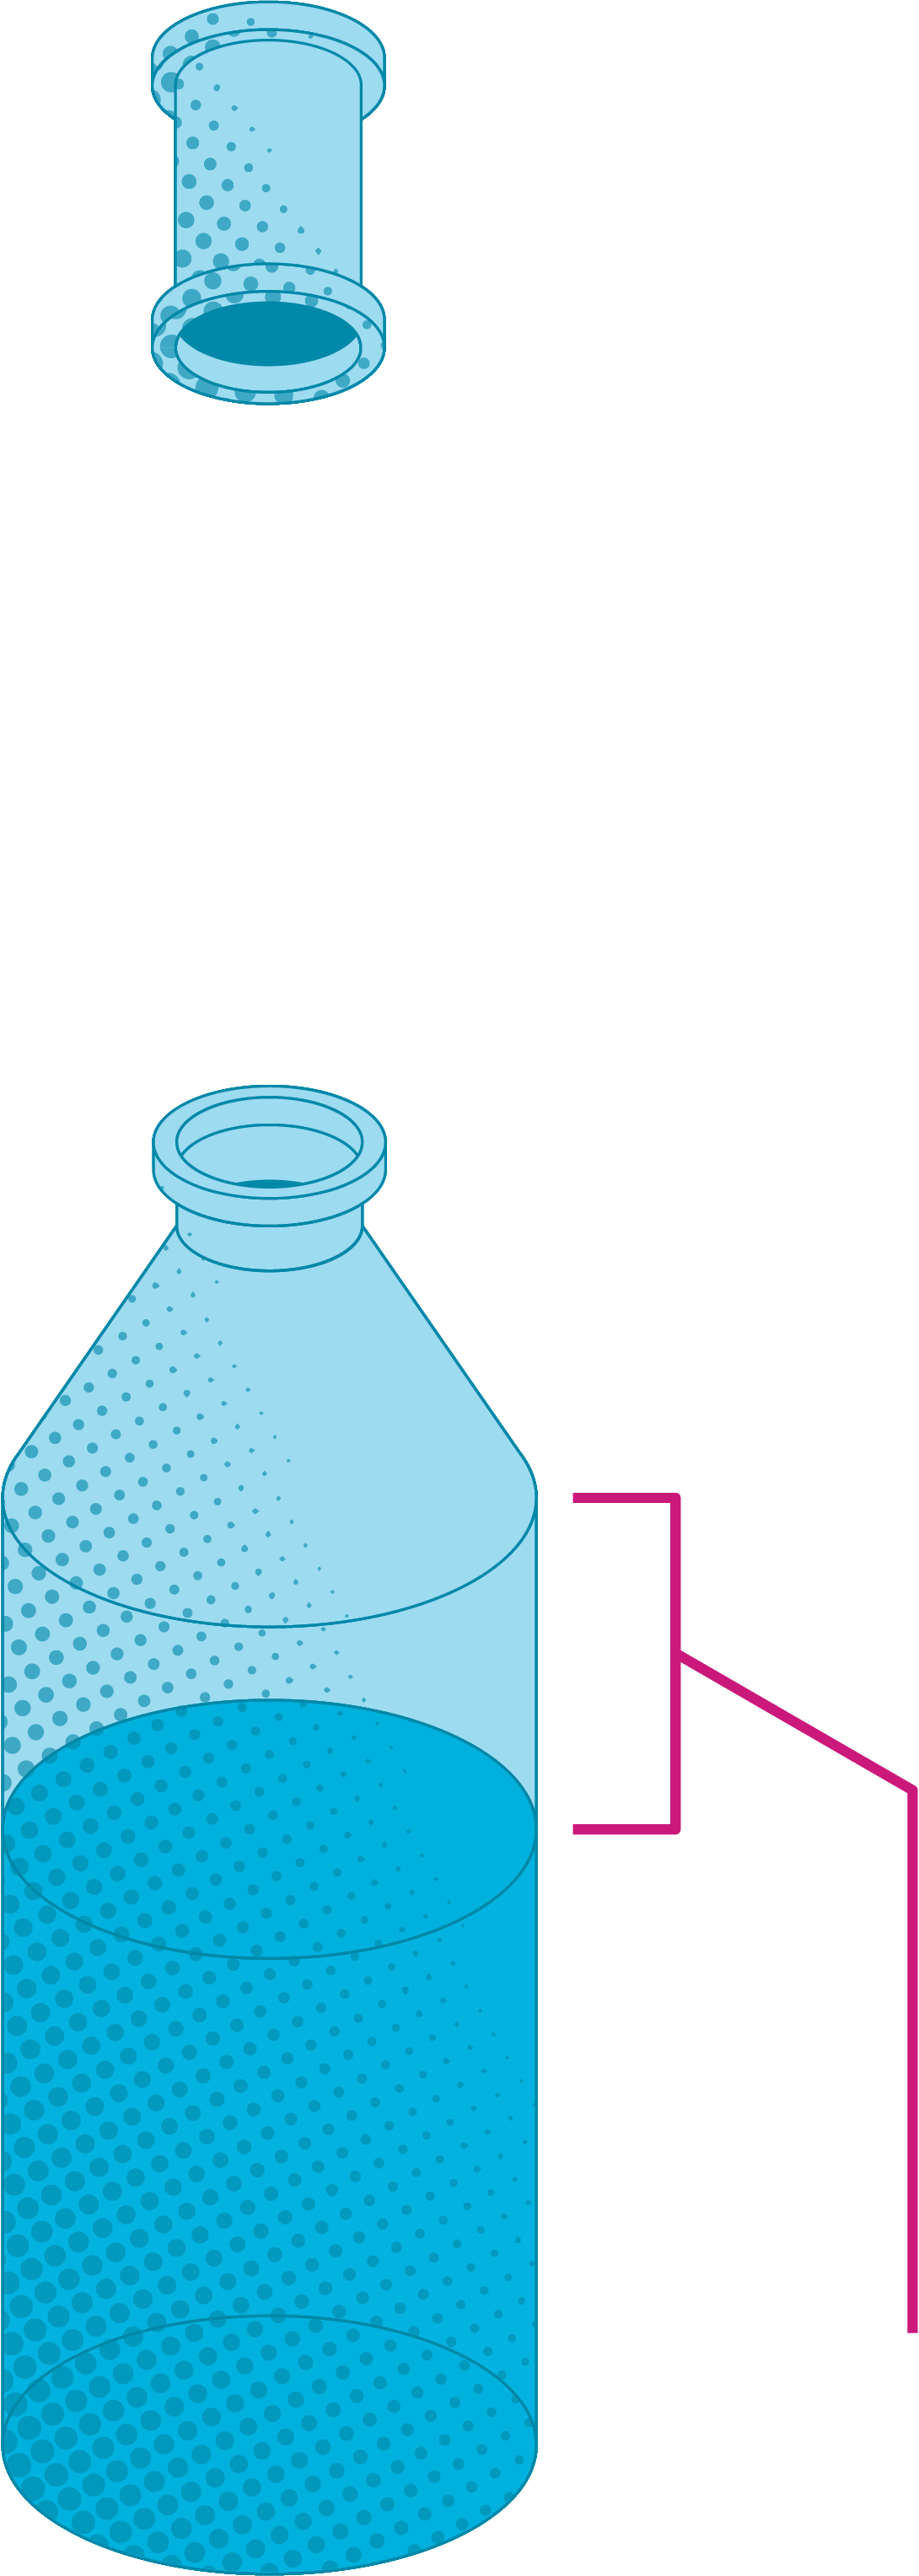 isometric illustartion of a pipe dripping water into a water bottle that is 35% empty